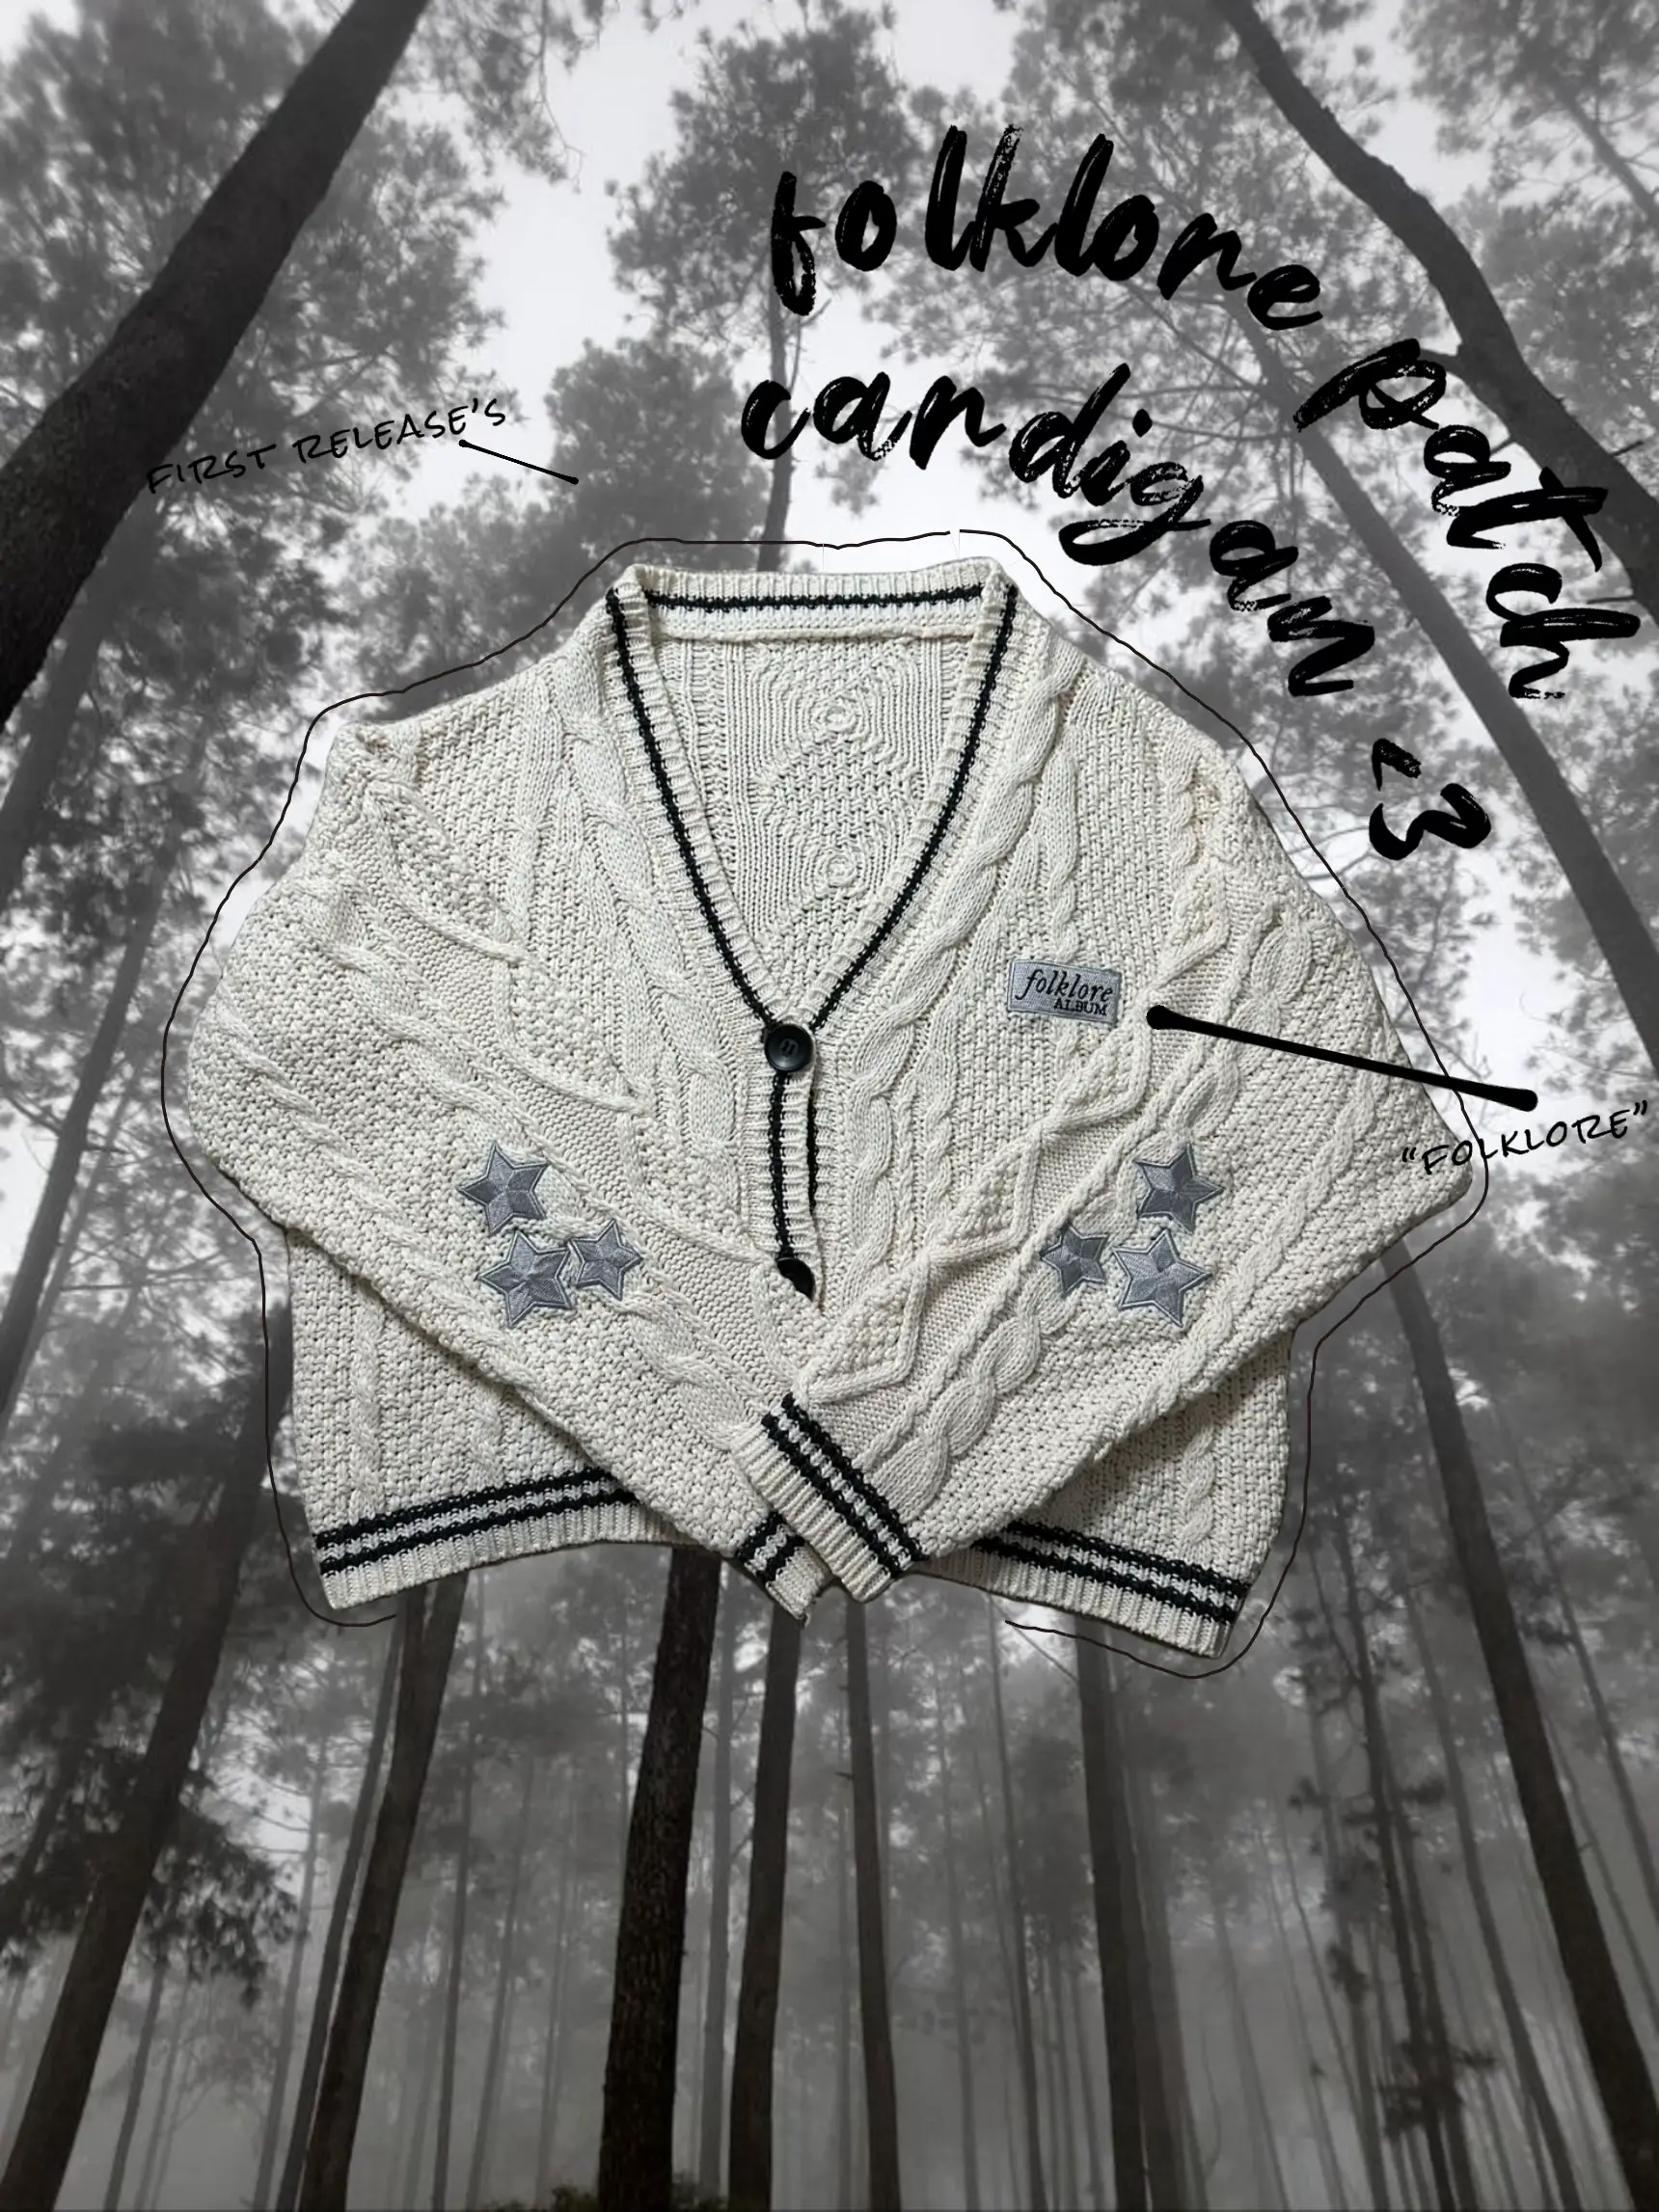 Folklore Cardigan w/ Taylor Swift Patch will be available on our